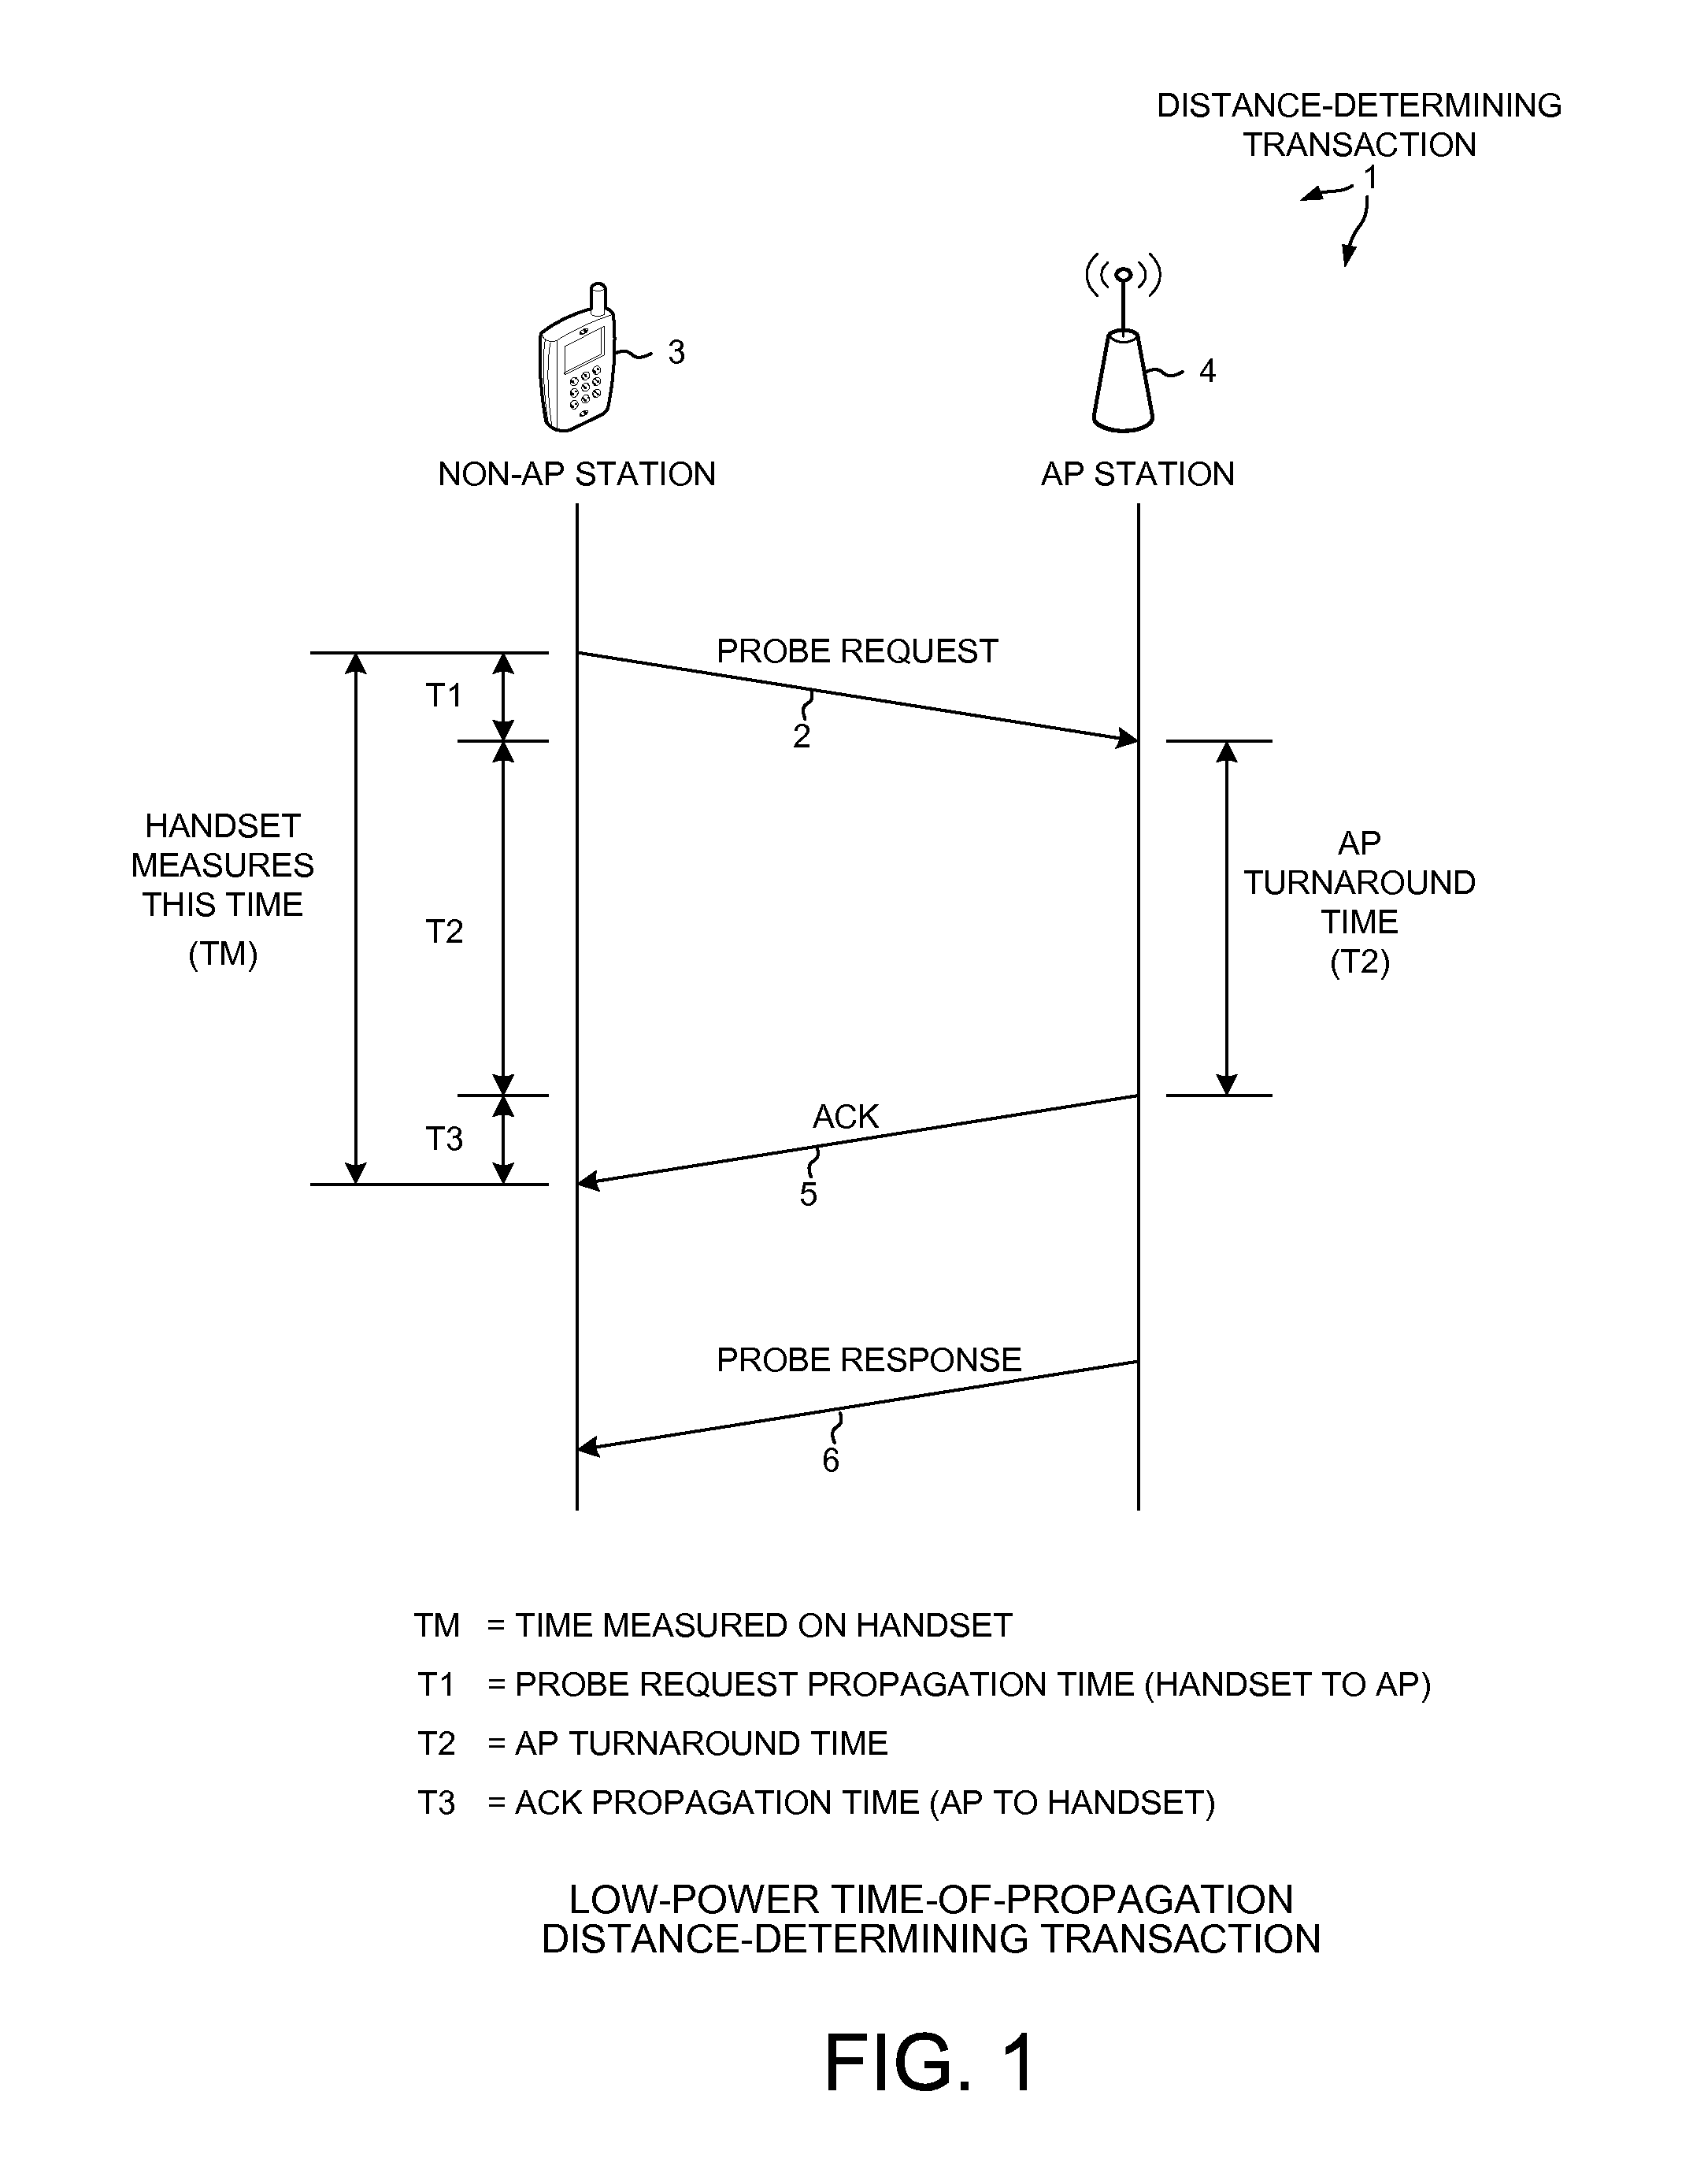 Method of selecting bit rate and transmit power for energy-efficient transmission